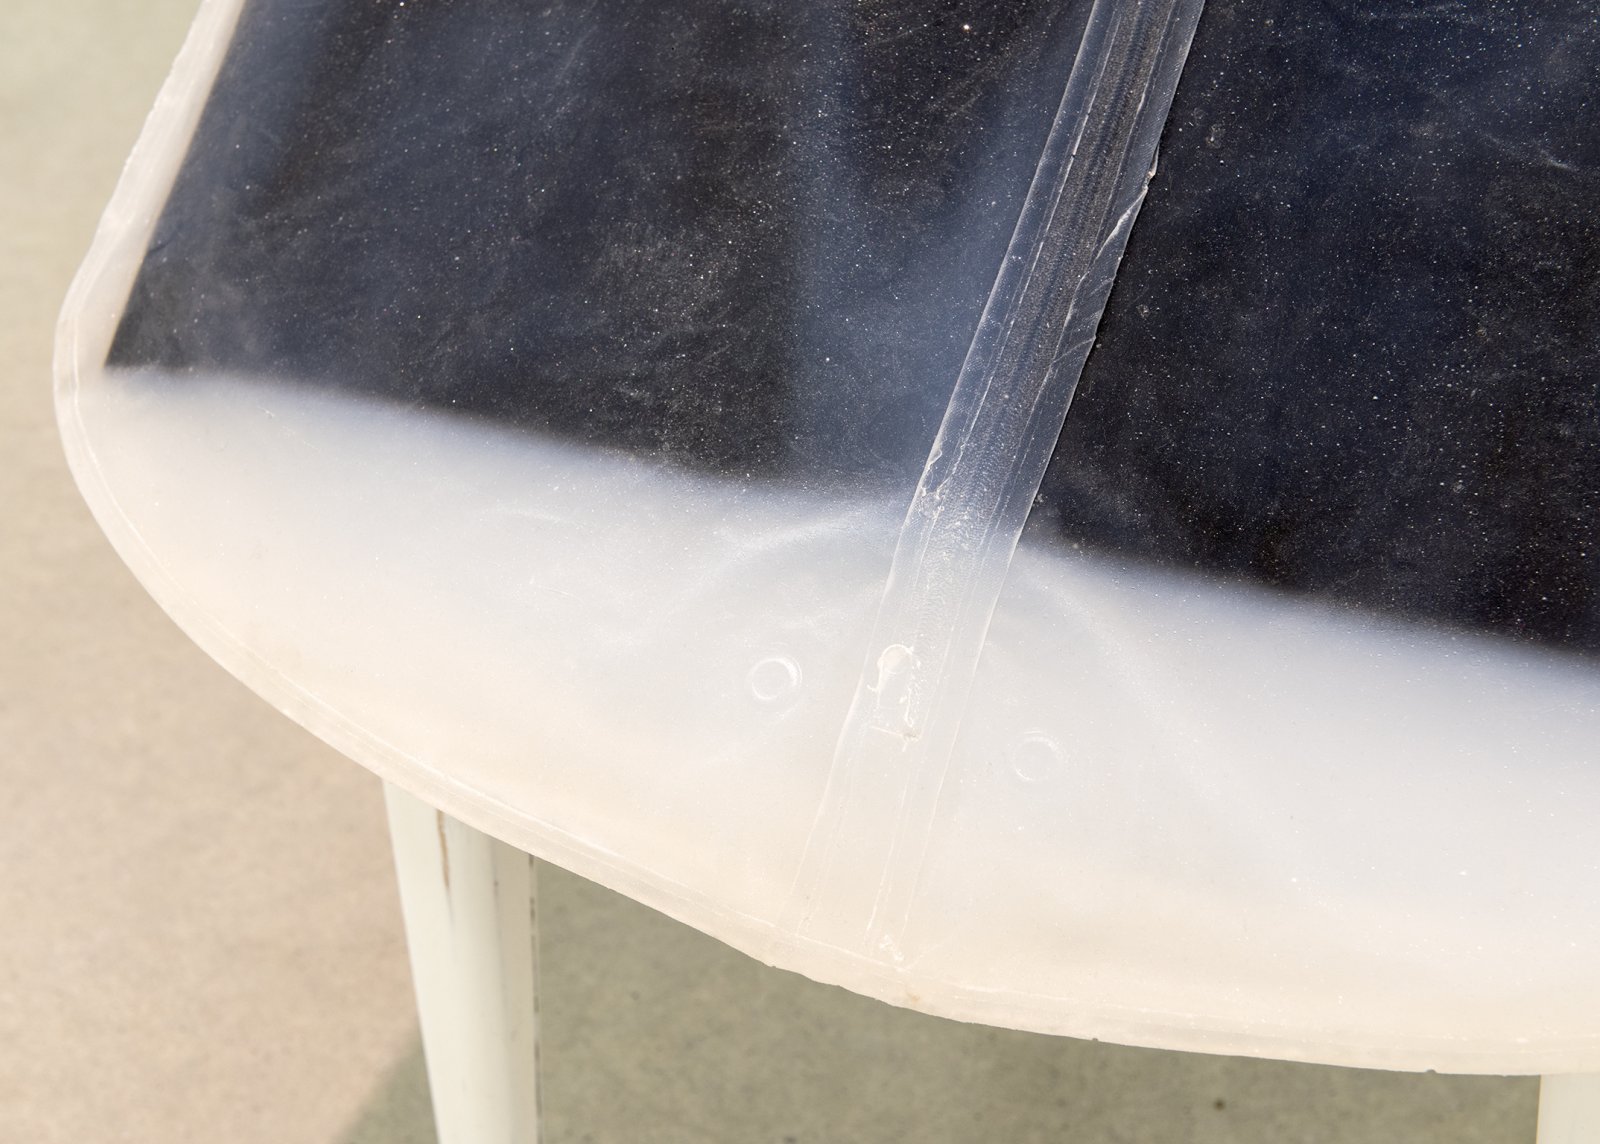 Liz Magor, Formal I (detail), 2012, platinum-cure silicone rubber, chair, 32 x 24 x 32 in. (81 x 61 x 81 cm) by Liz Magor